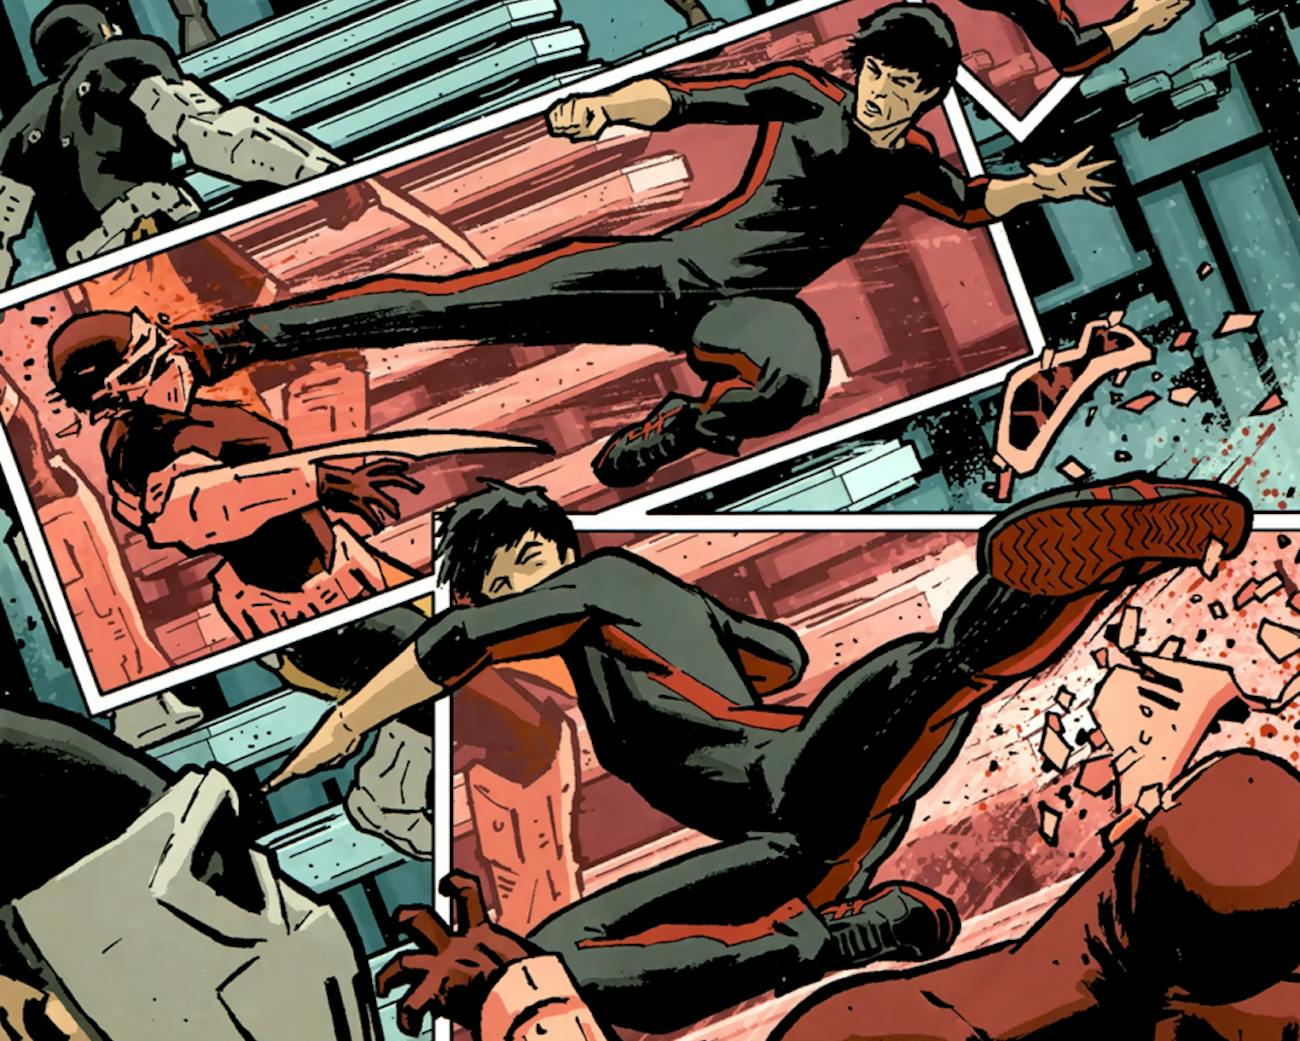 shang-chi-in-secret-avengers-18-illustrated-by-david-aja.png